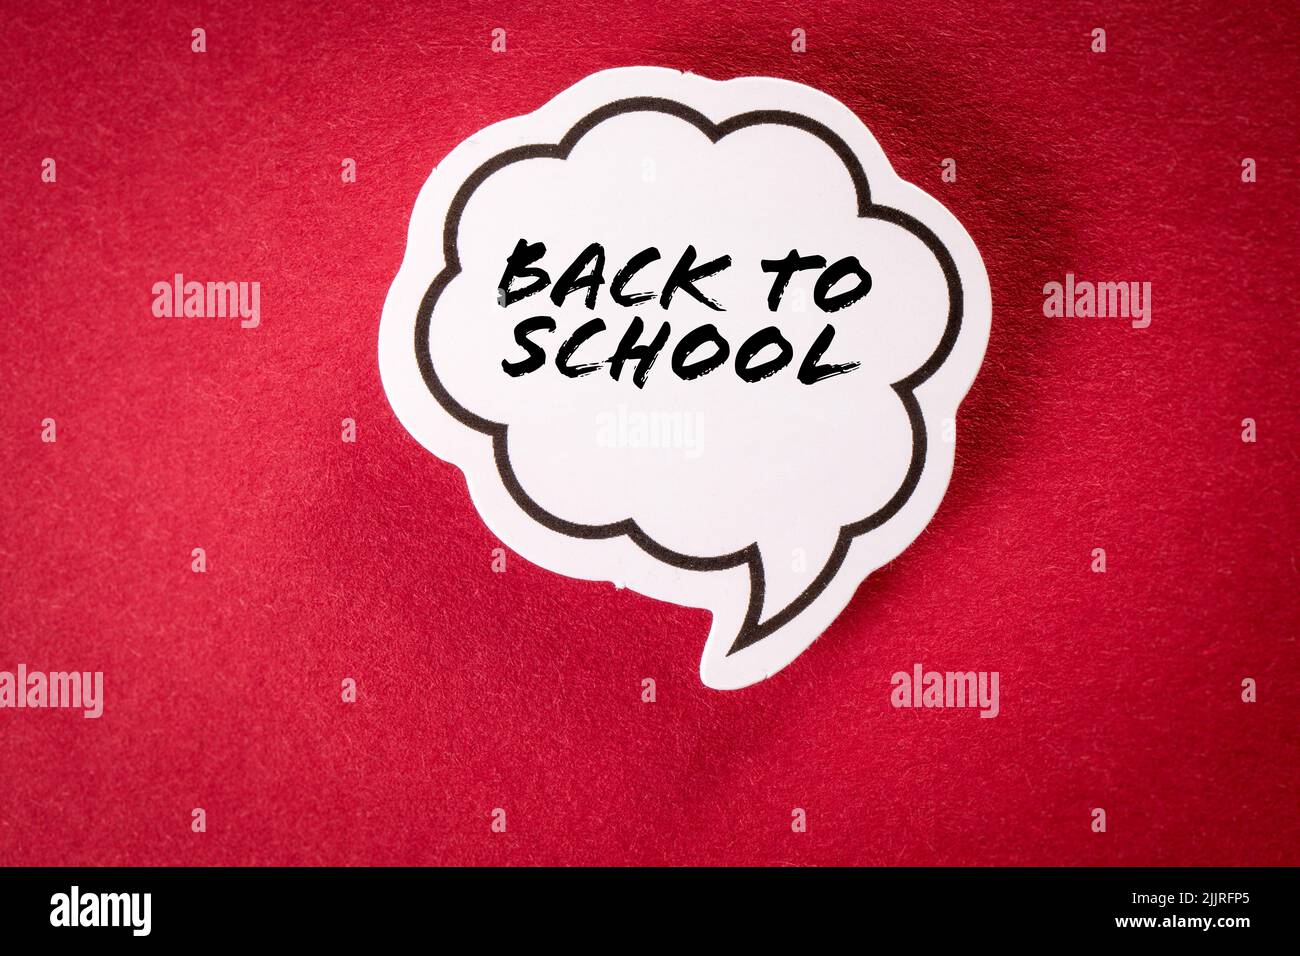 Back to school. Speech bubble with text on red background. Stock Photo